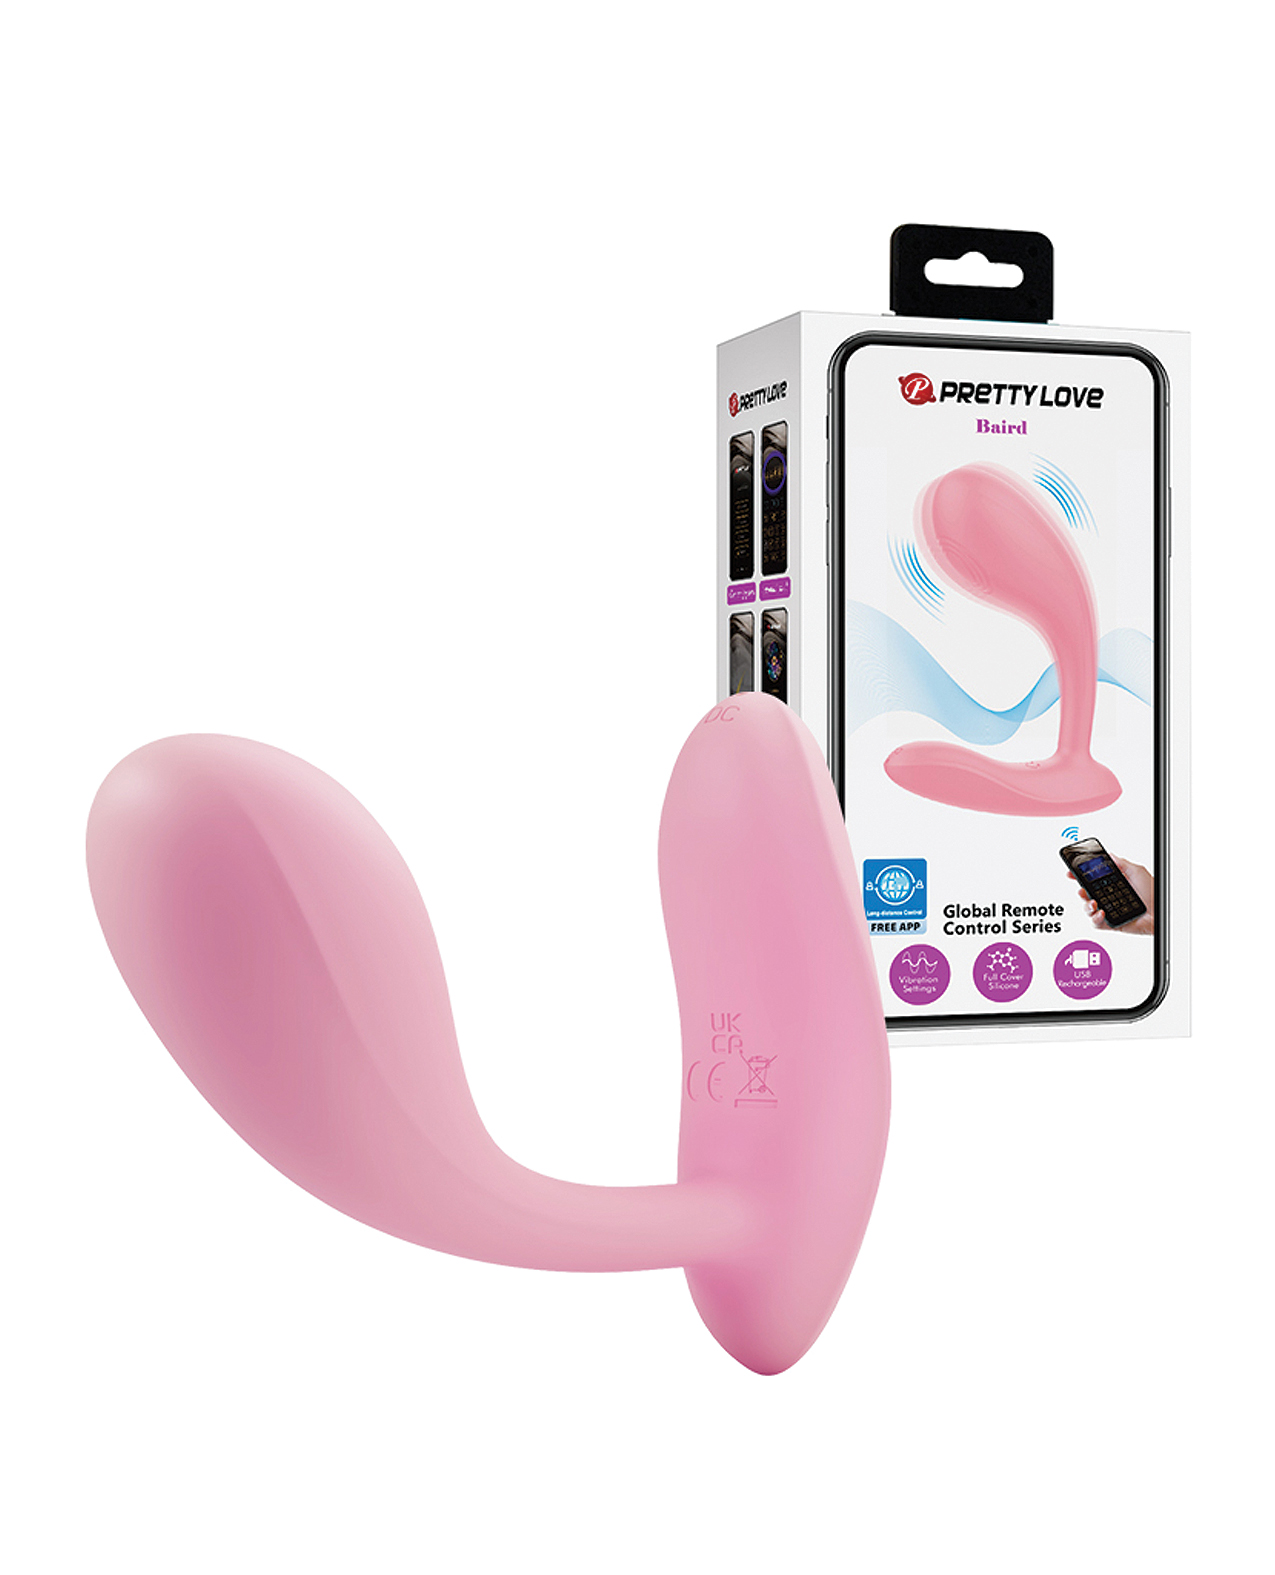 Pretty Love Baird is an App-Enabled Vibrating Butt Plug in Hot Pink